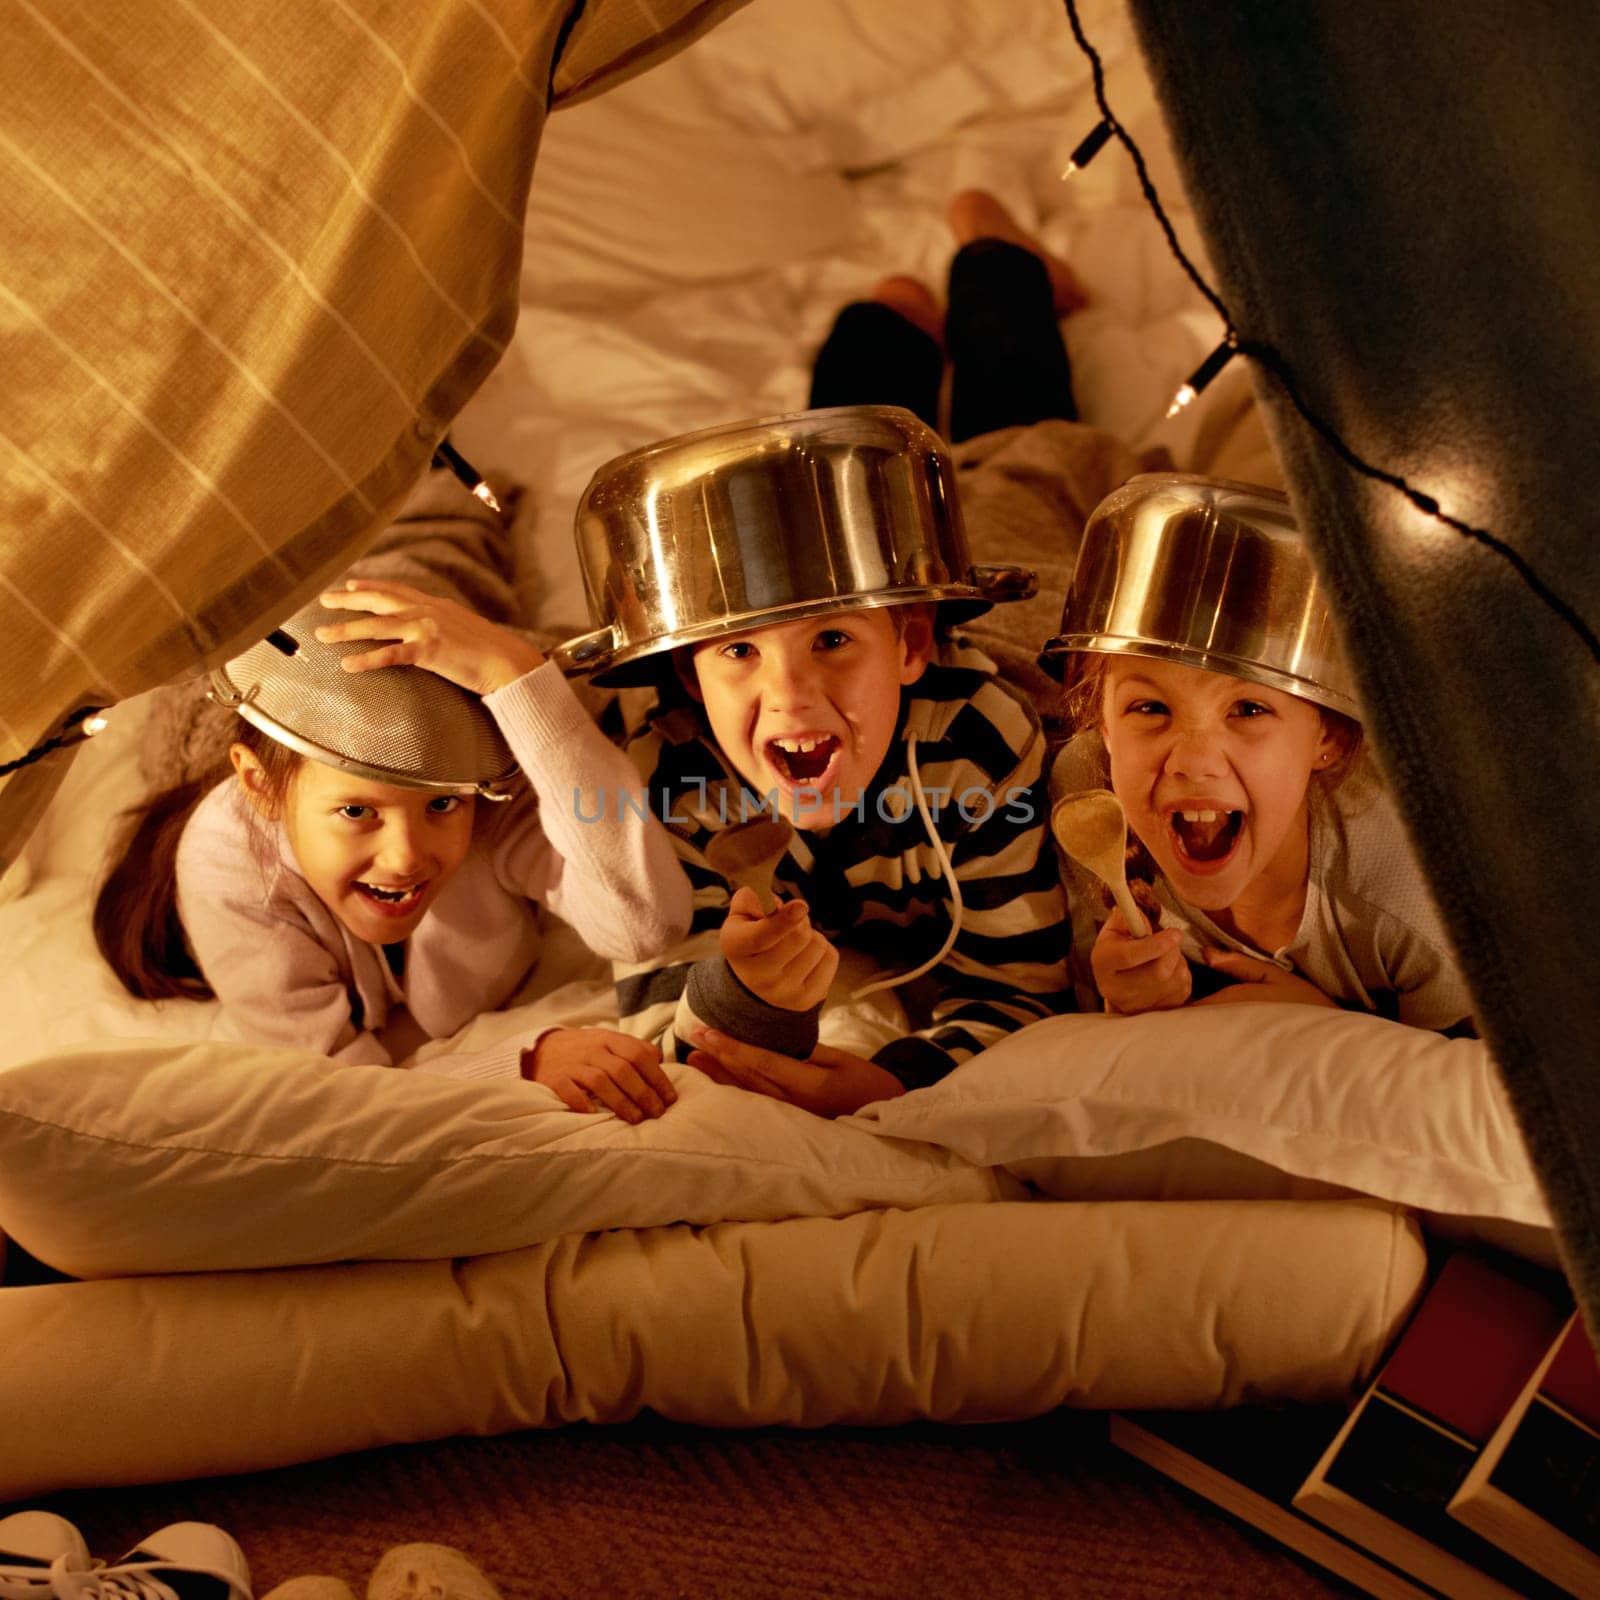 Children, portrait and siblings with pot helmet in a fort for fantasy, learning or playing in their home. Happy family, face and kids on a floor with tent games, development or fun bonding in a house by YuriArcurs